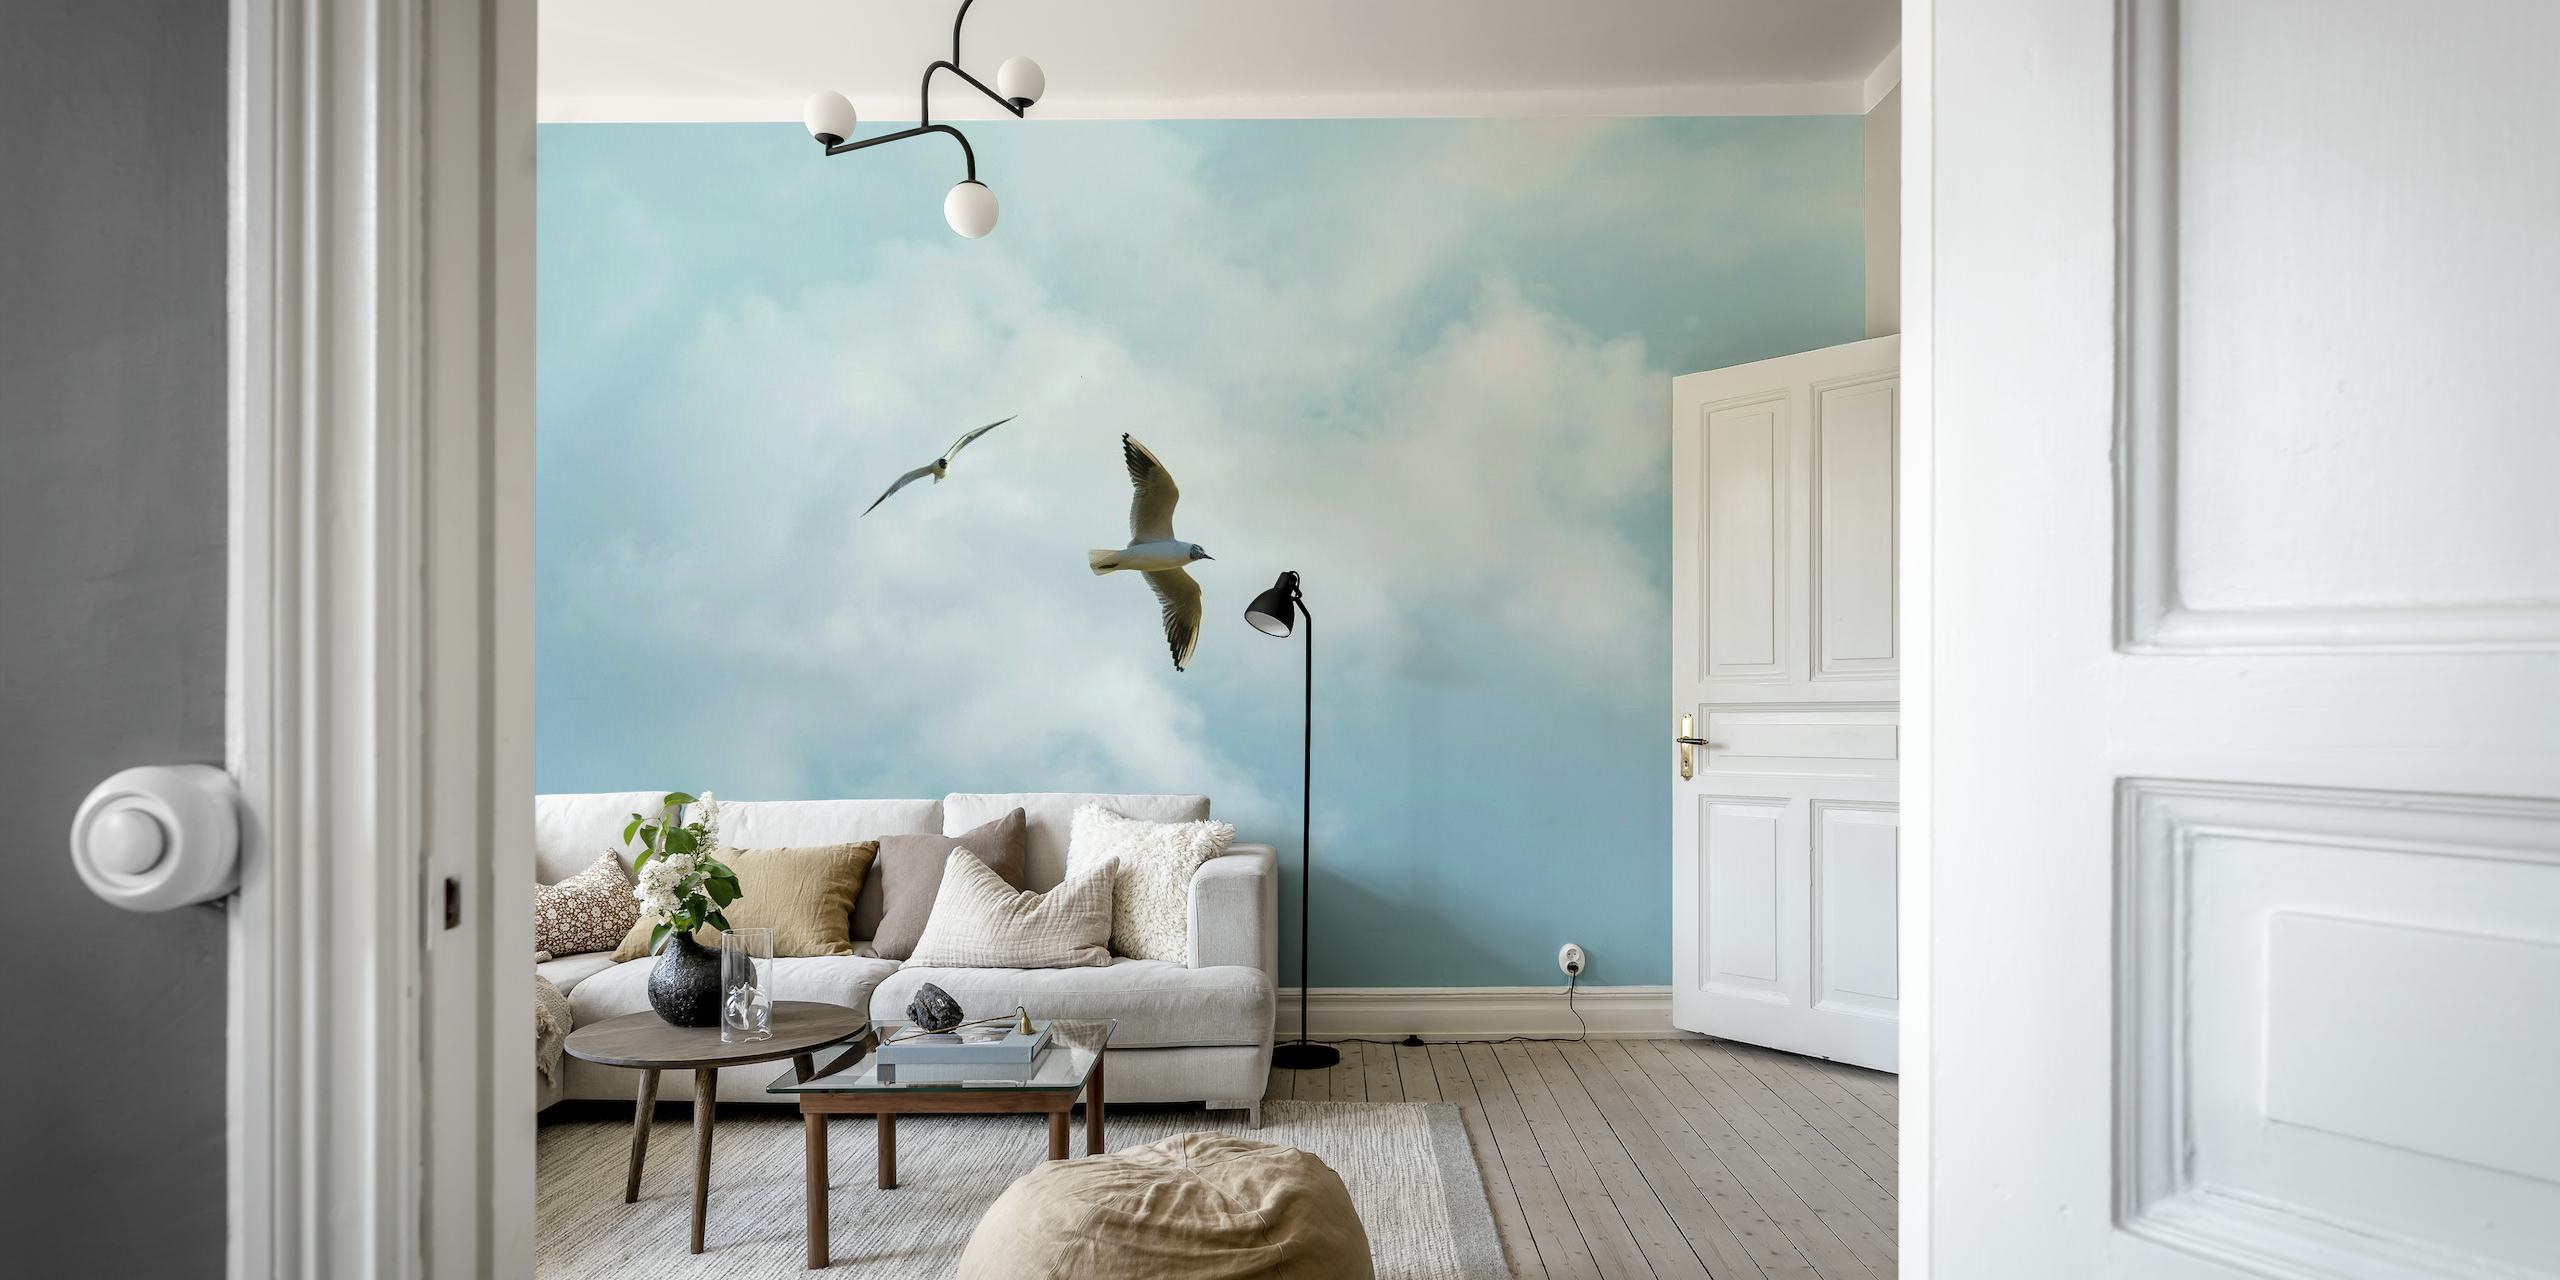 Two seabirds flying in a peaceful sky with fluffy clouds mural